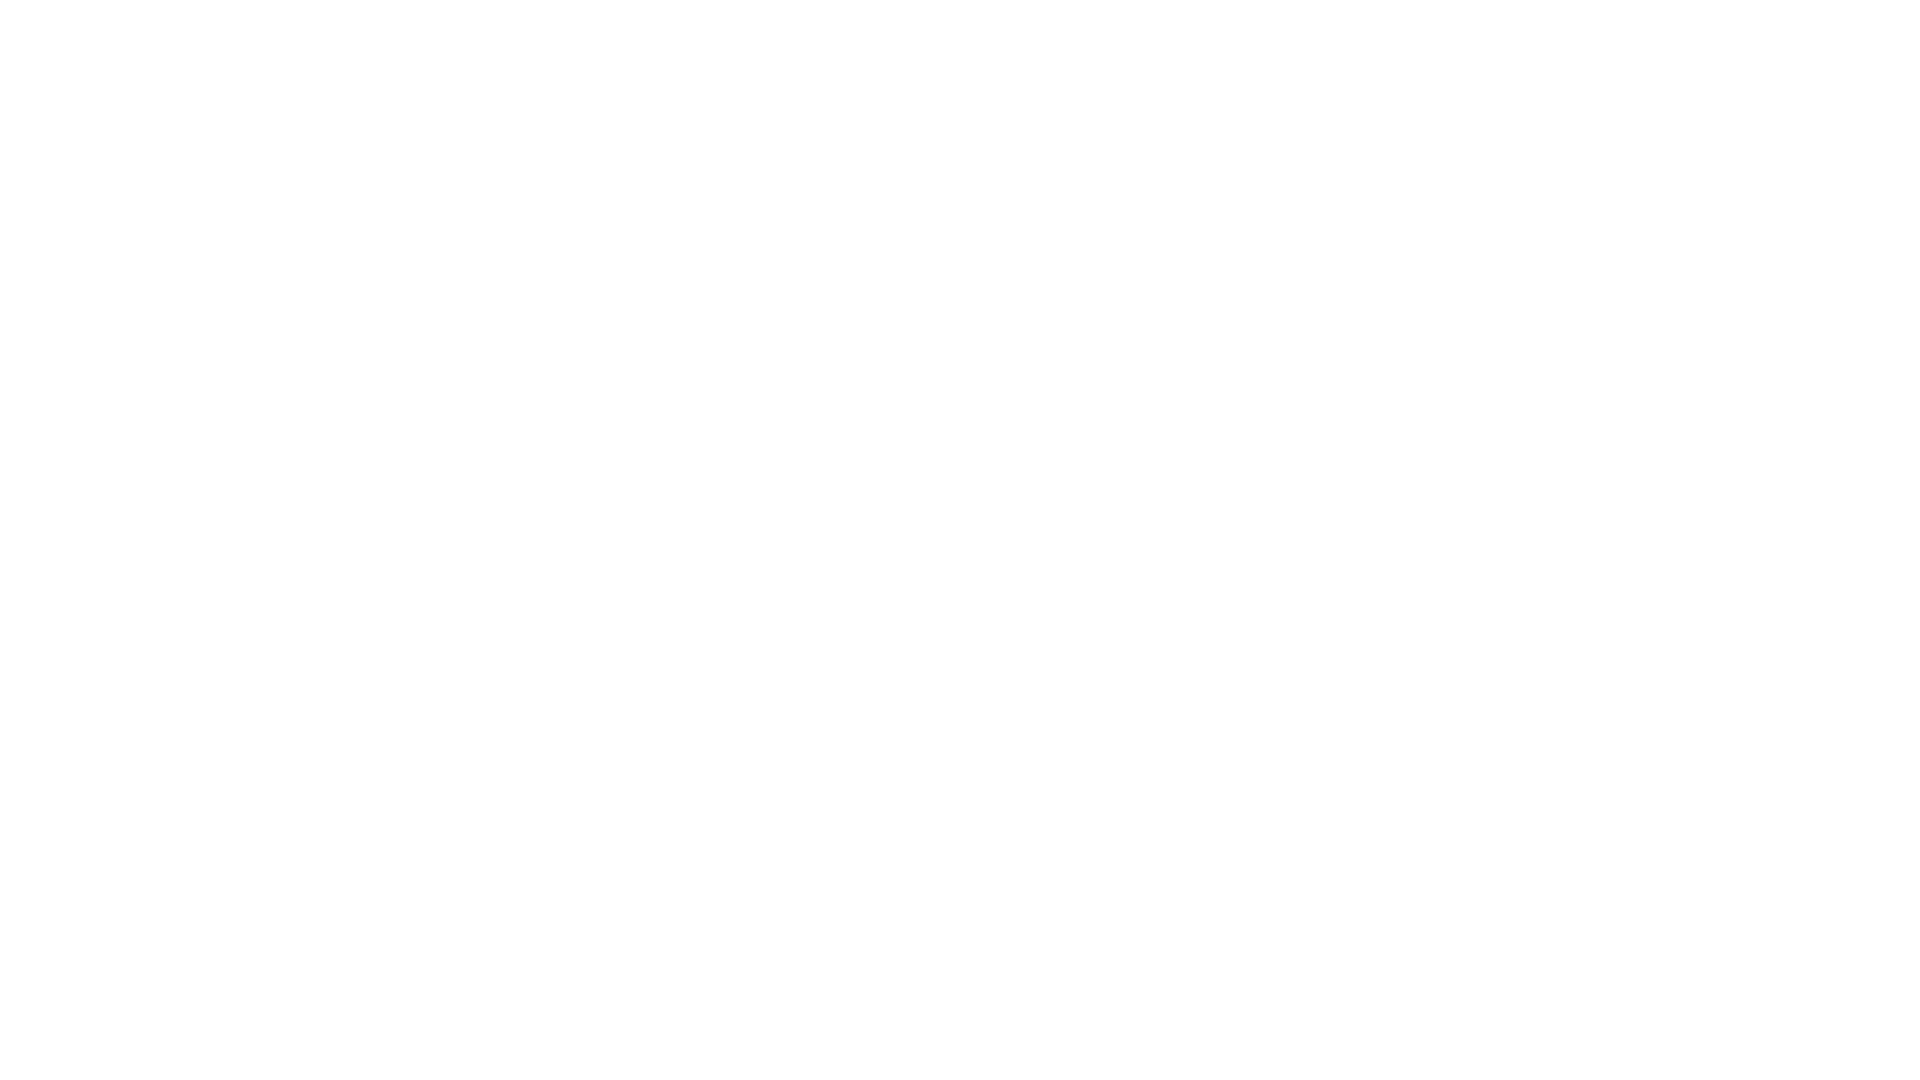 flowtis by nature